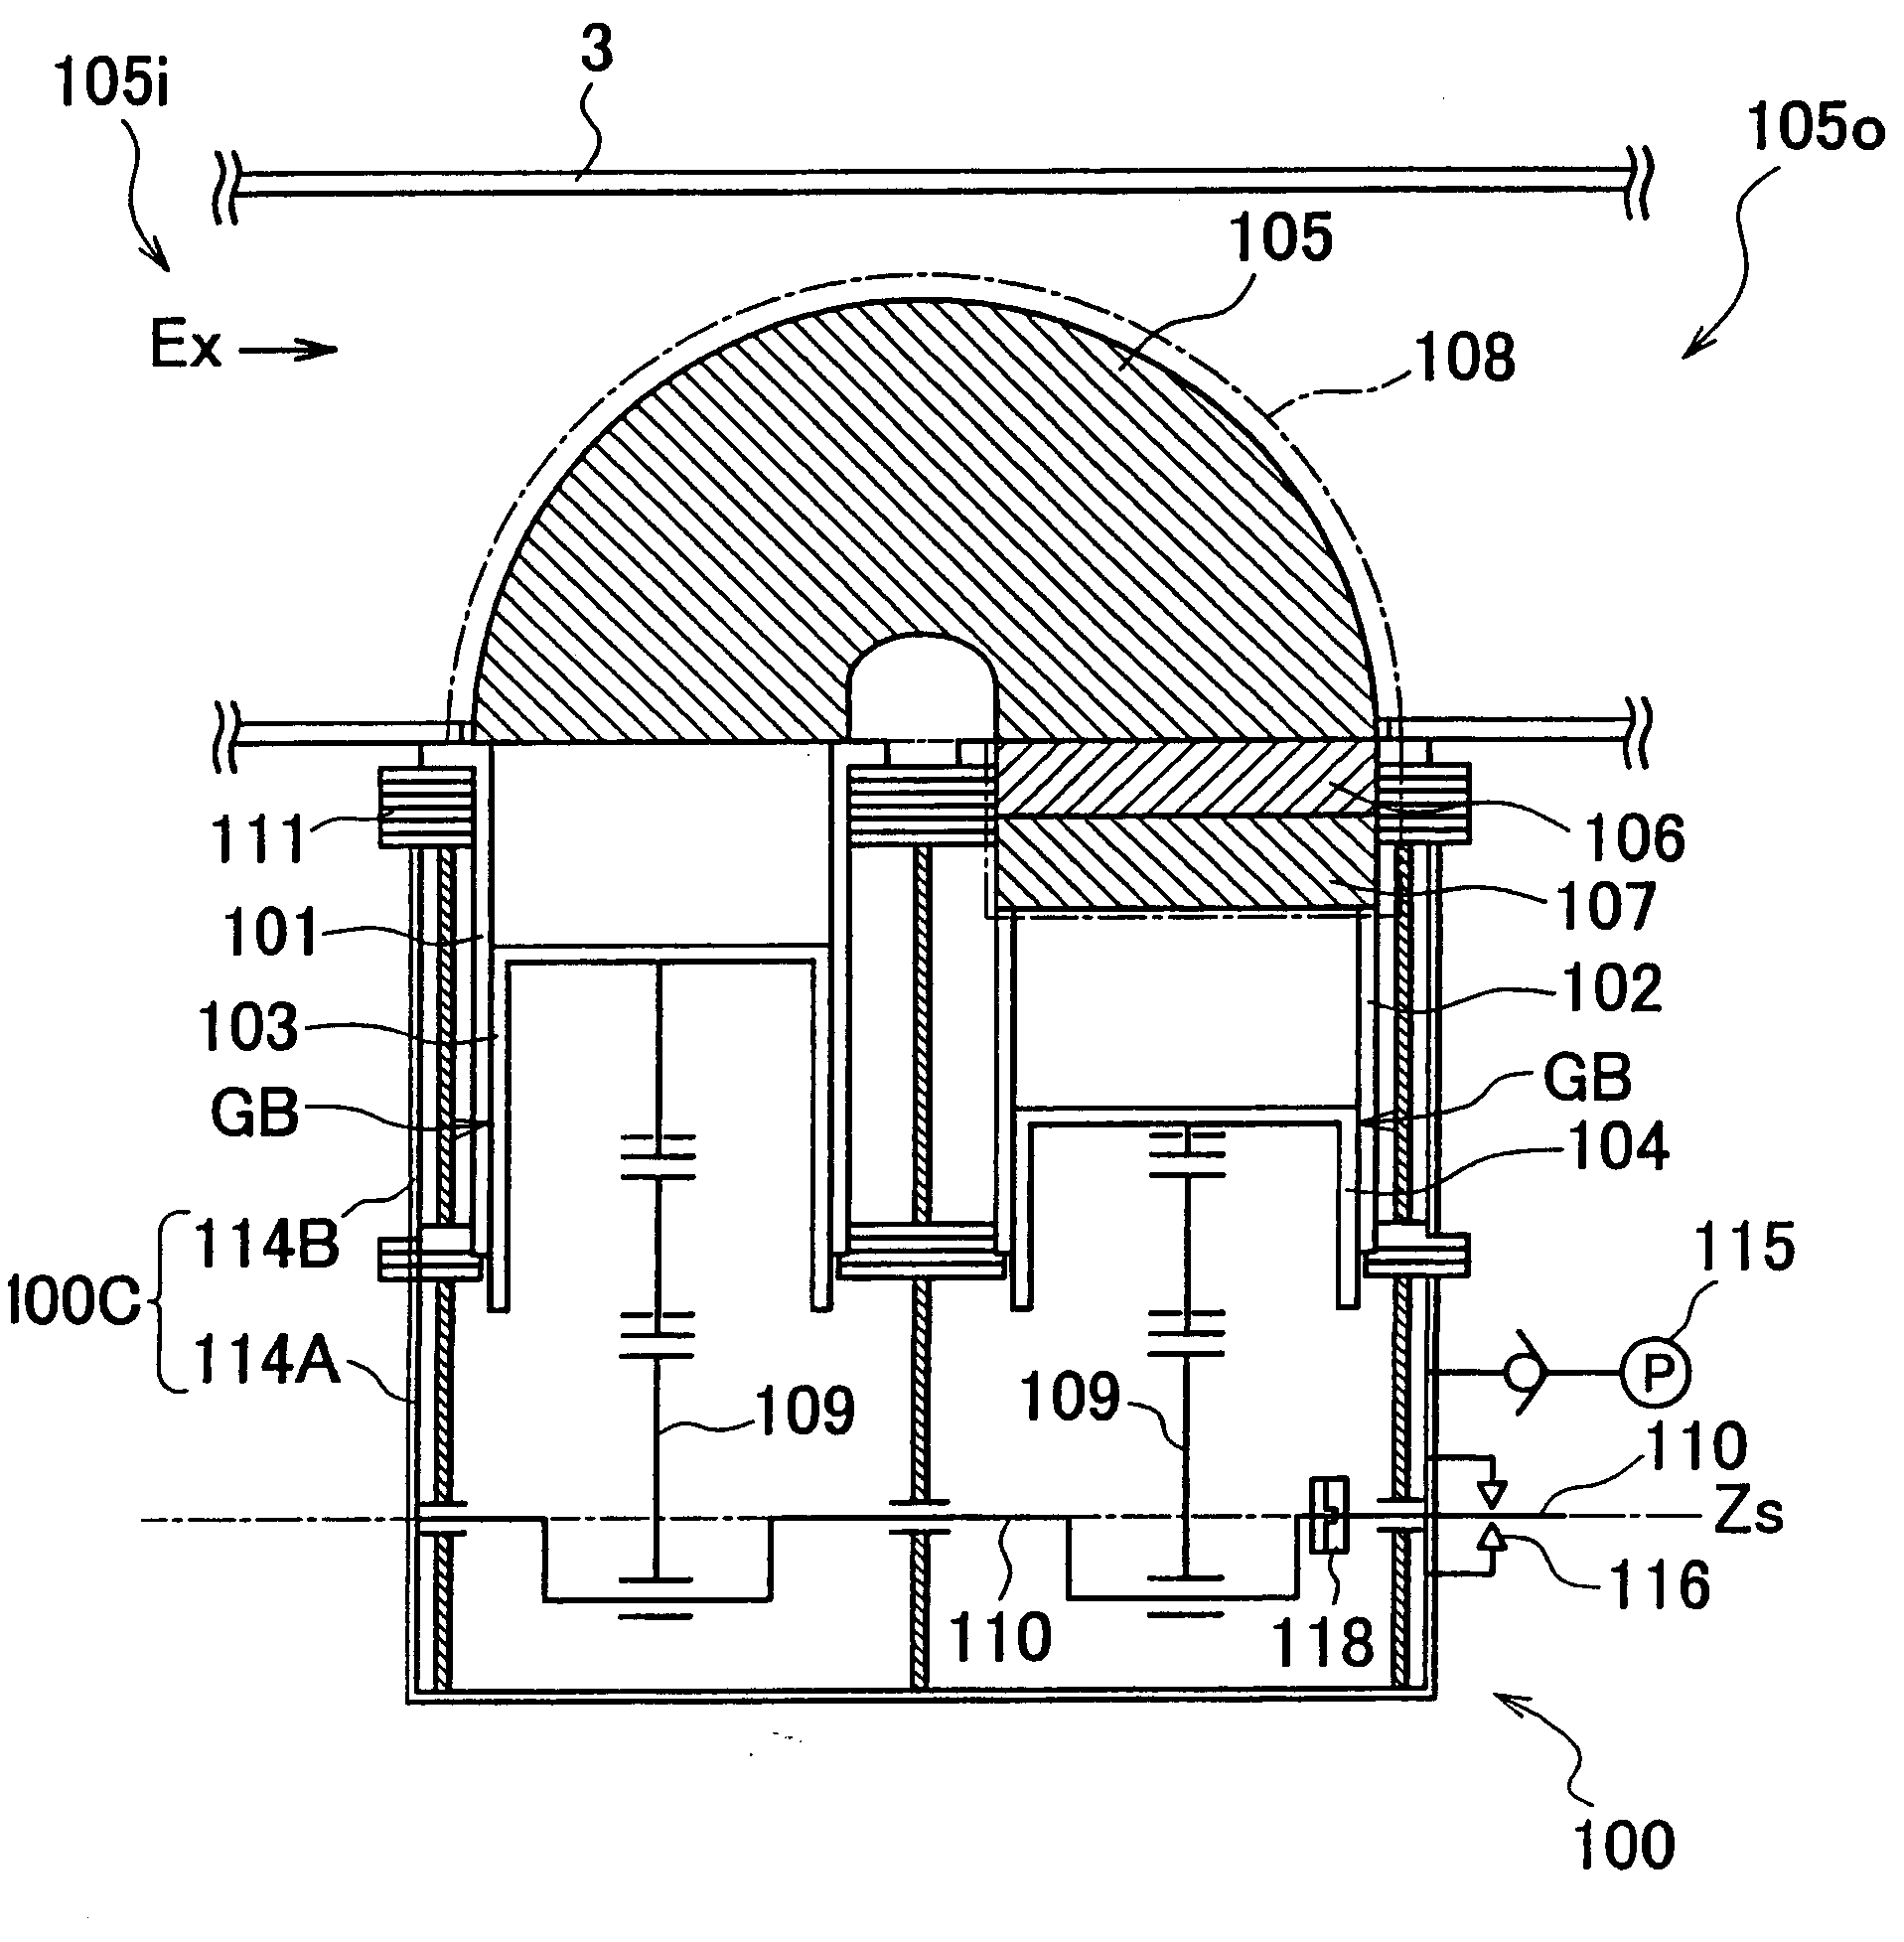 Exhaust Heat Recovery Apparatus